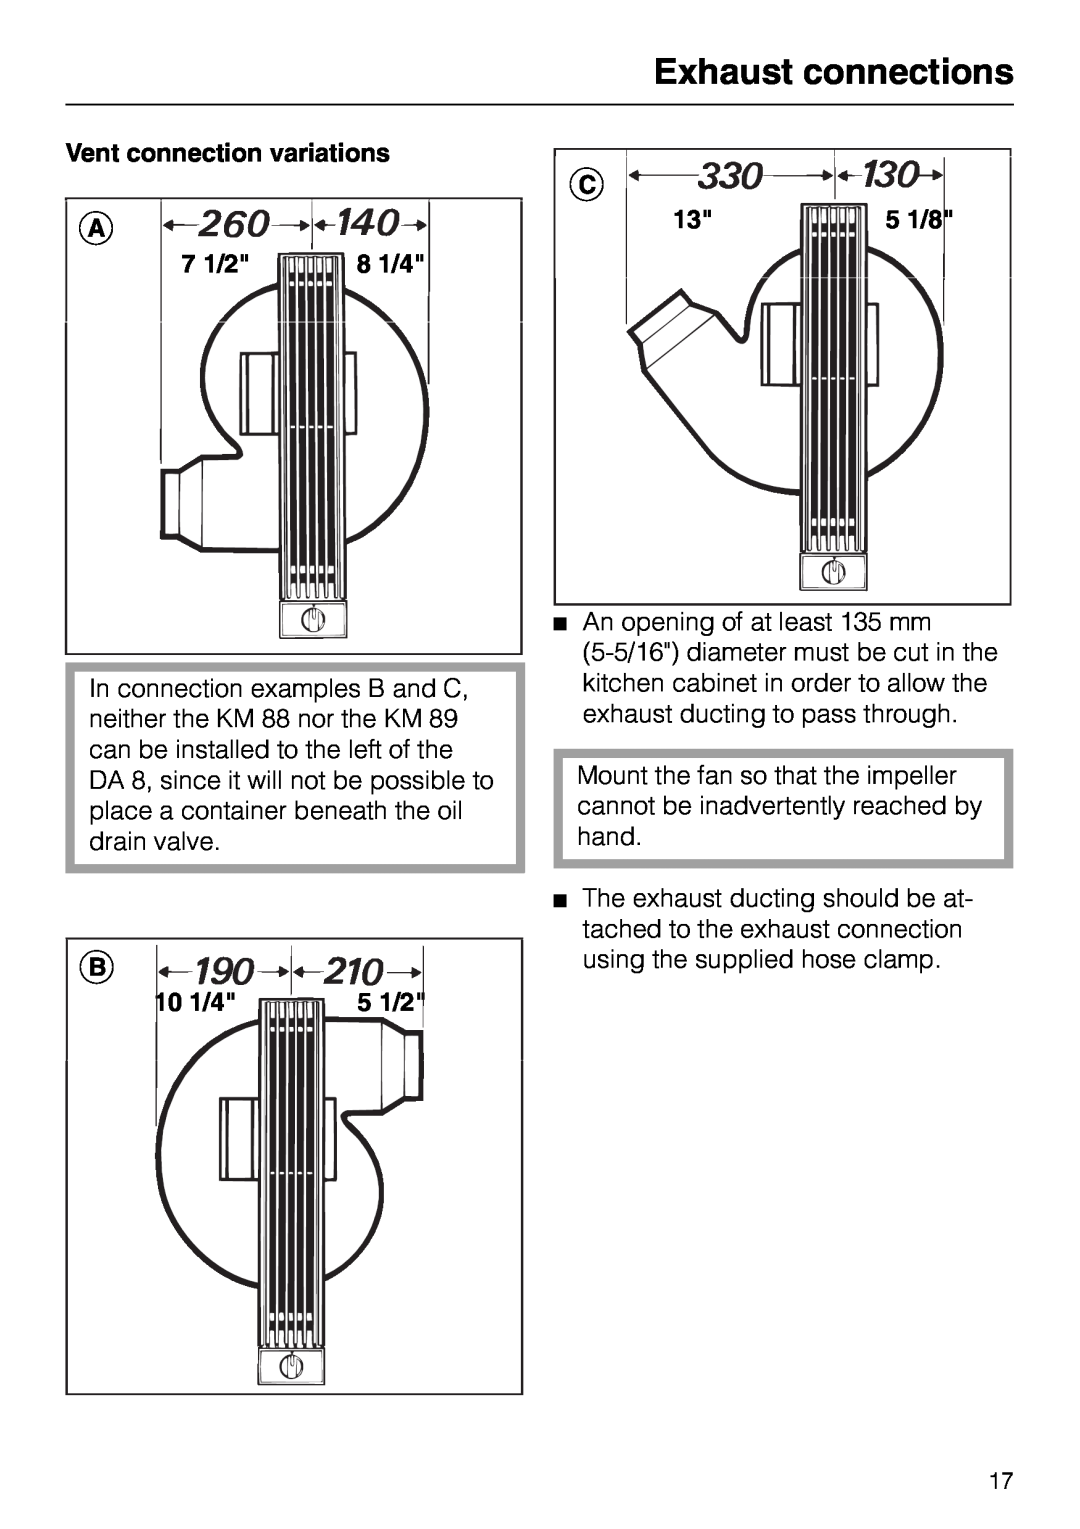 Miele DA 8-2 manual Exhaust connections, Vent connection variations, 7 1/2, 8 1/4, 5 1/8, 10 1/4, 5 1/2 